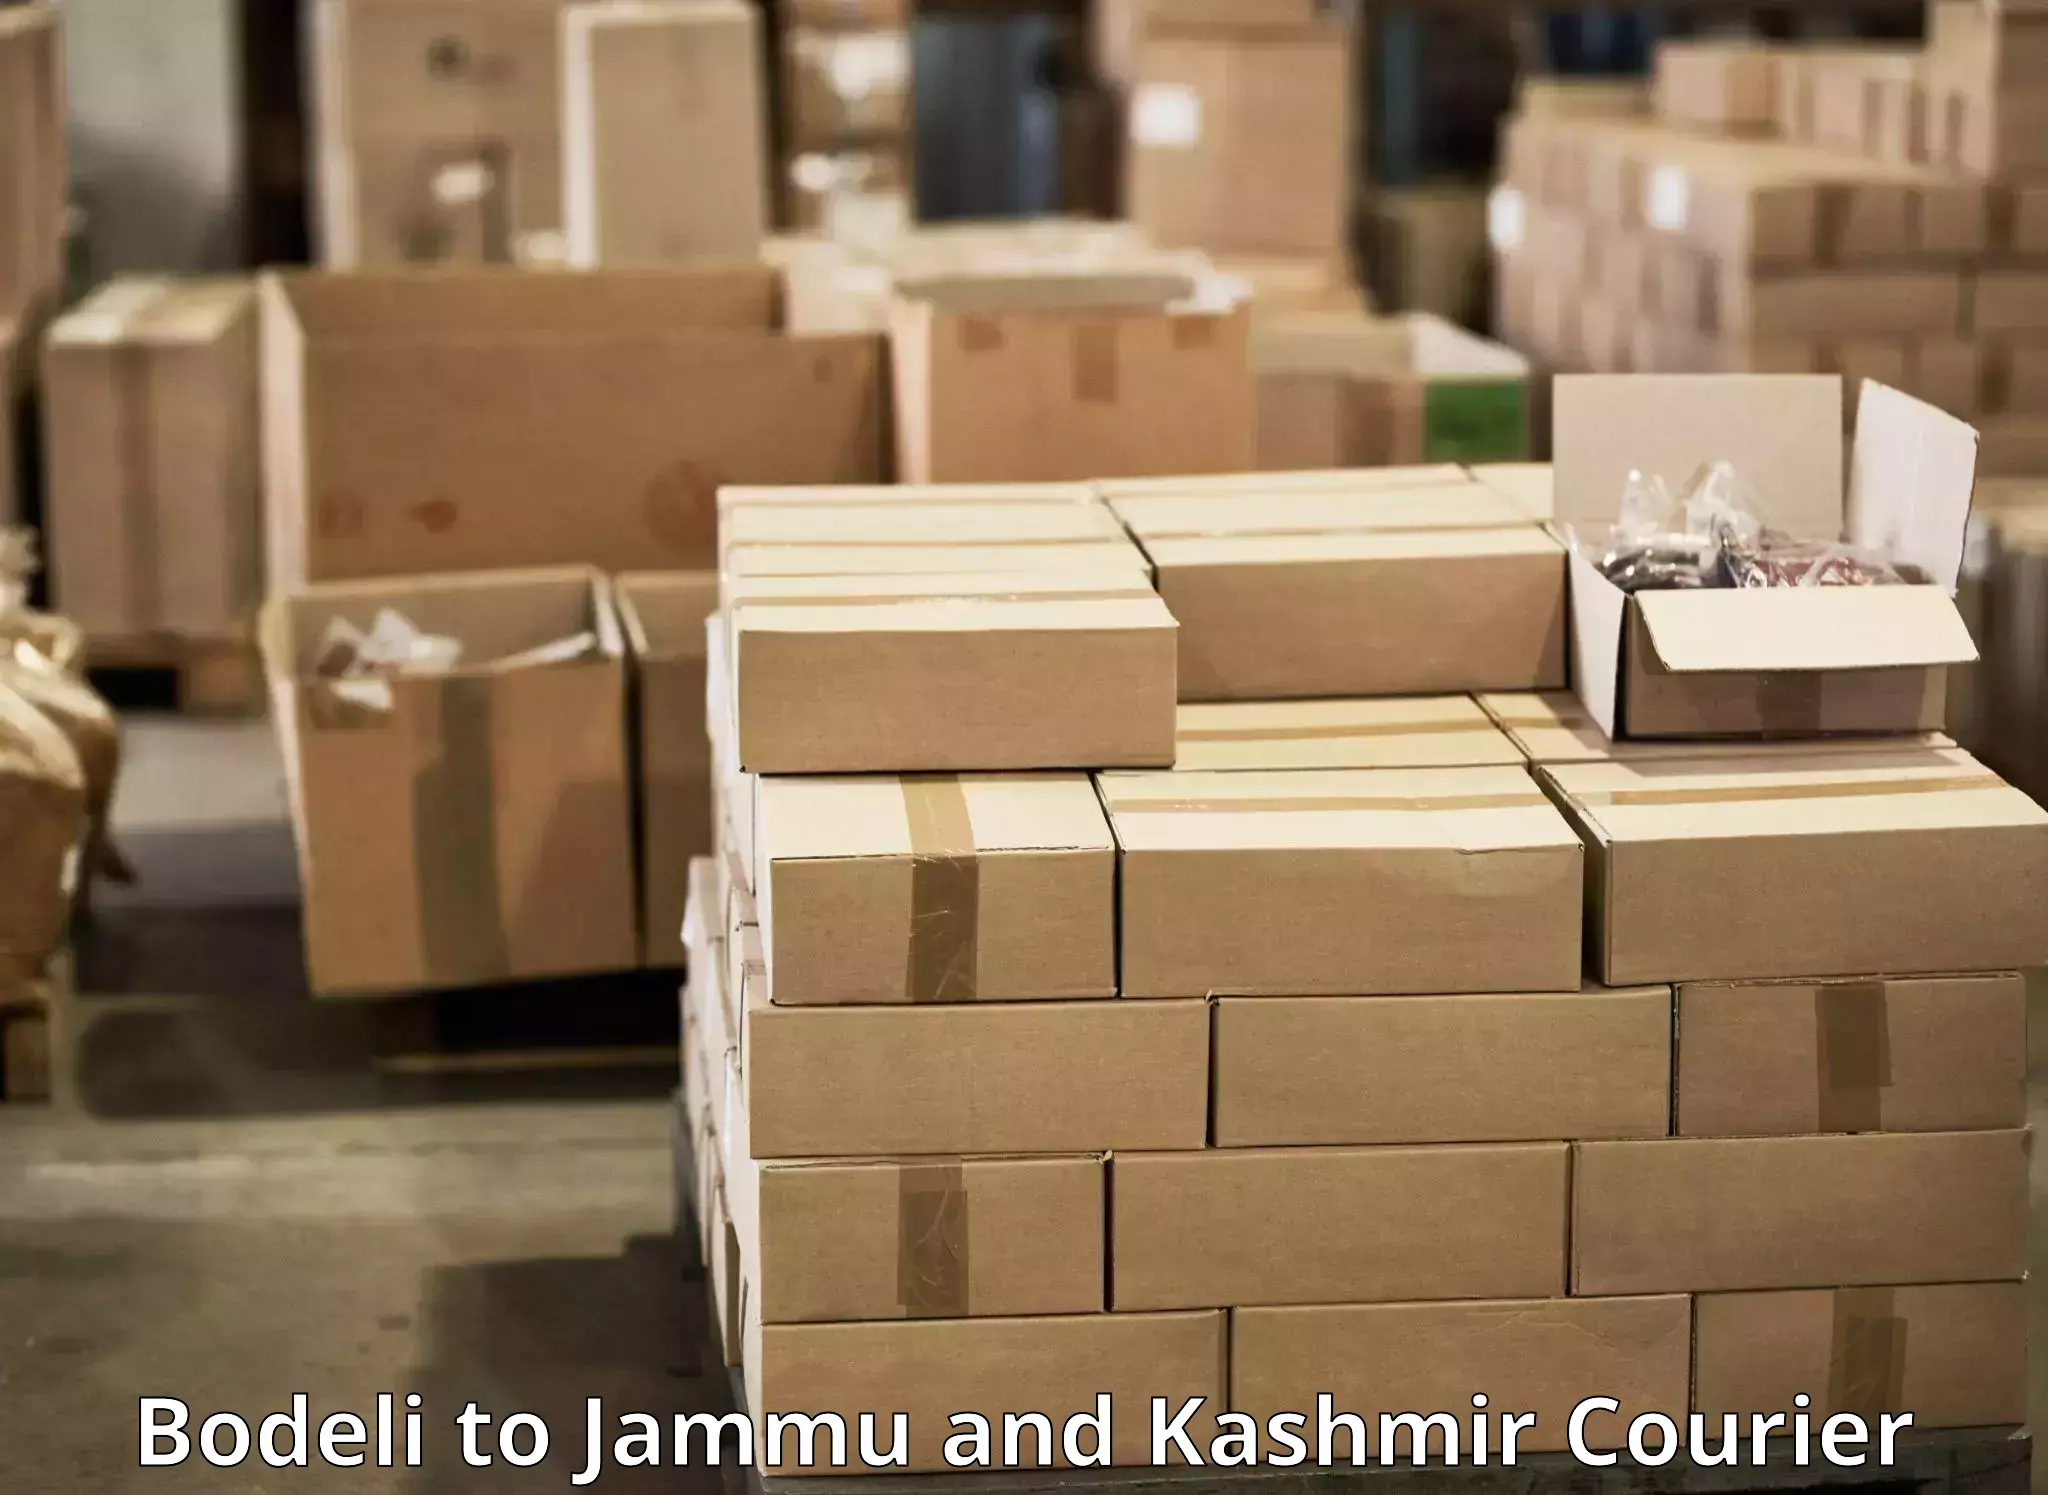 Express courier capabilities in Bodeli to Baramulla